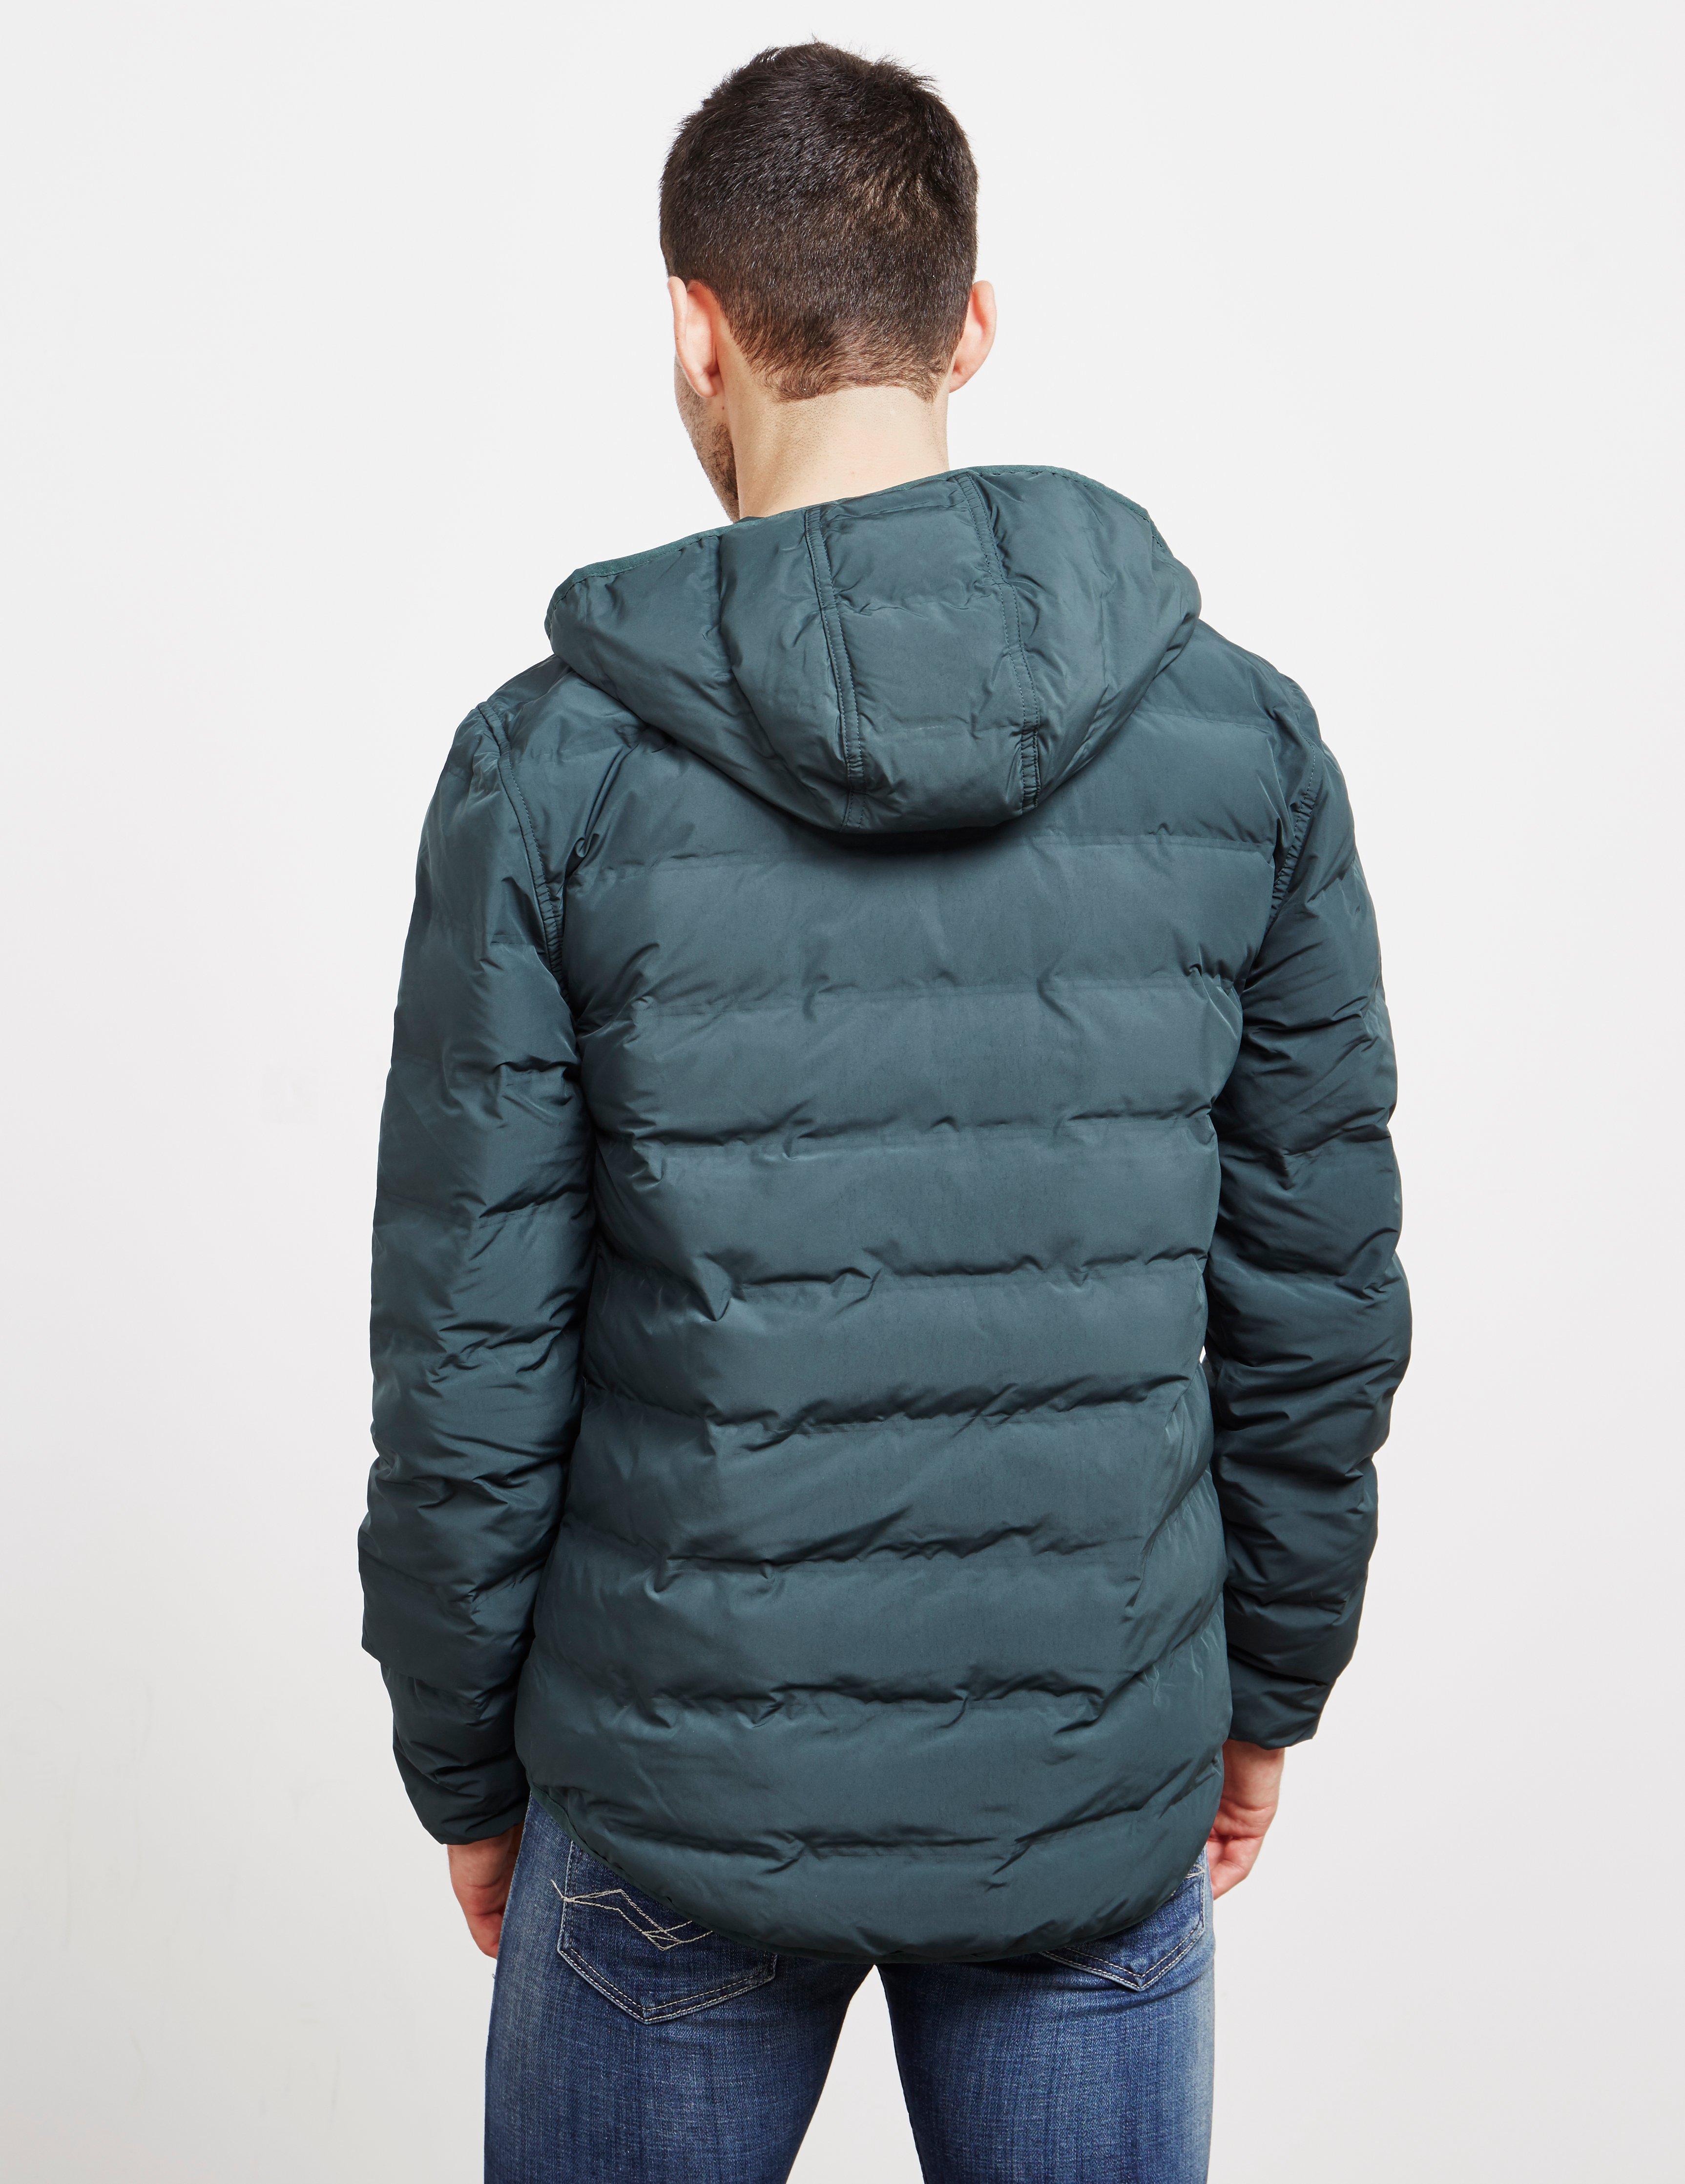 Fred Perry Hooded Puffer Jacket In Green Sale, 58% OFF |  www.ingeniovirtual.com